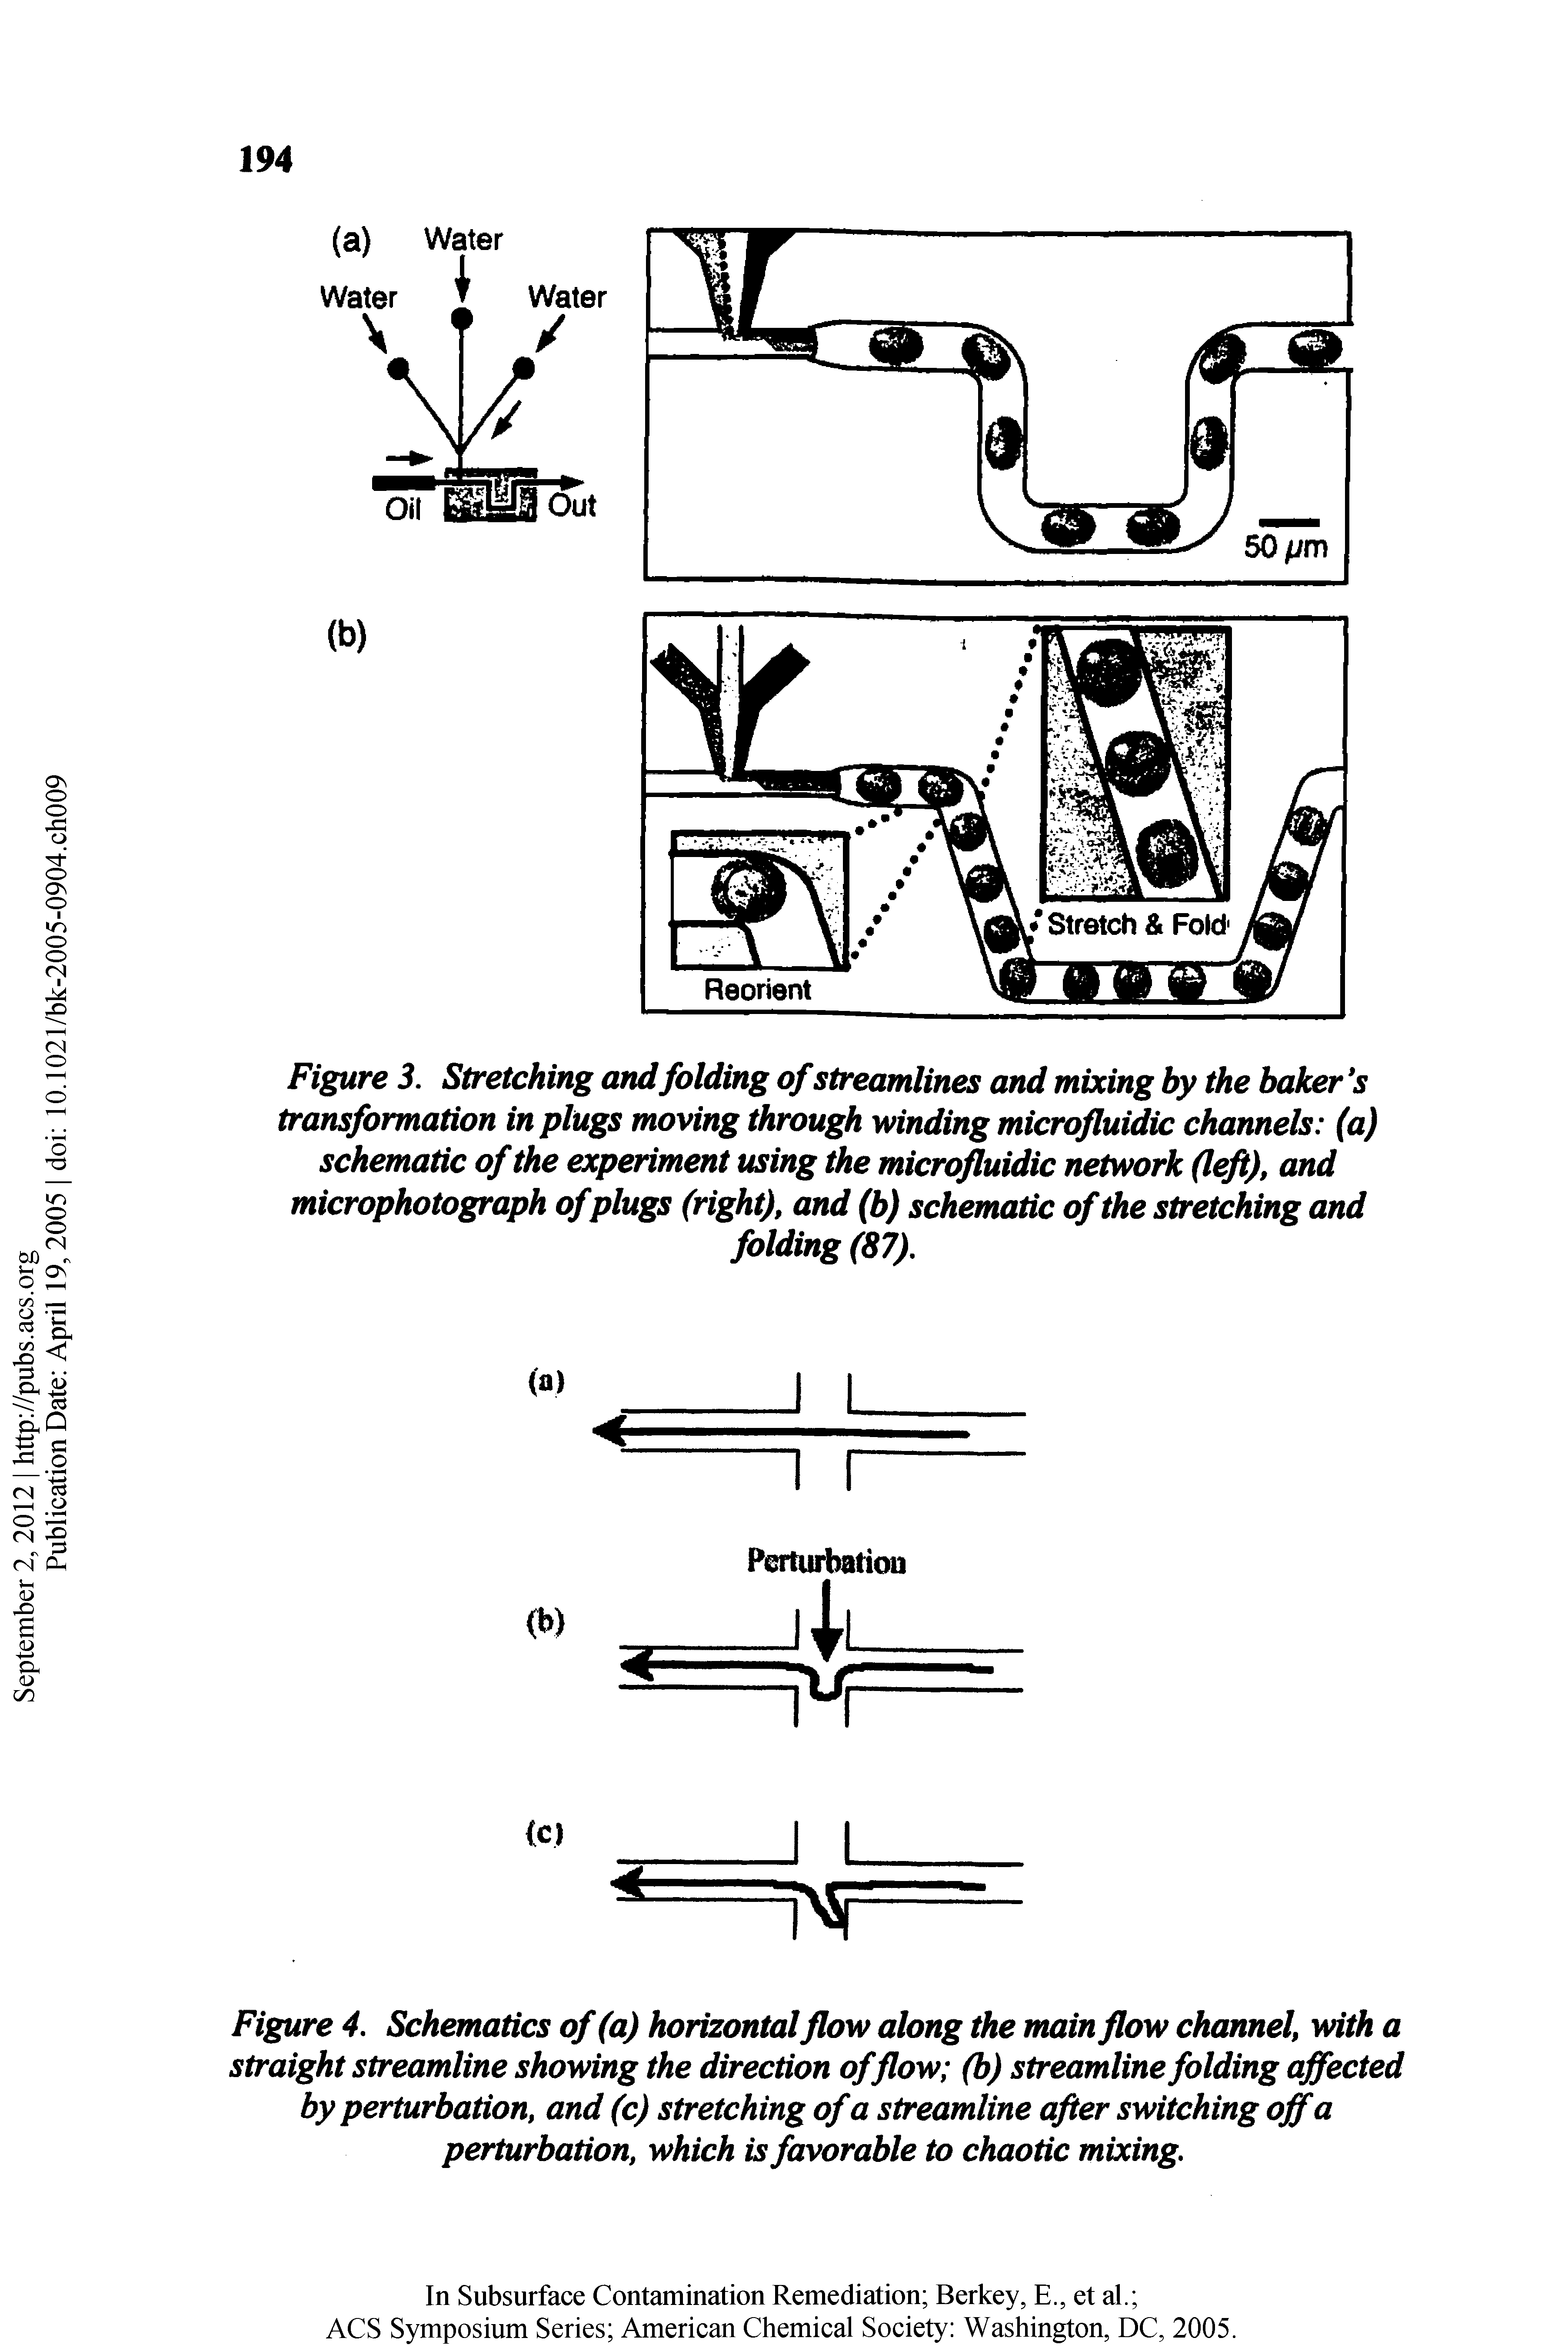 Figure 4, Schematics of (a) horizontal flow along the main flow channel, with a straight streamline showing the direction offlow (b) streamline folding affected by perturbation, and (c) stretching of a streamline after switching off a perturbation, which is favorable to chaotic mixing.